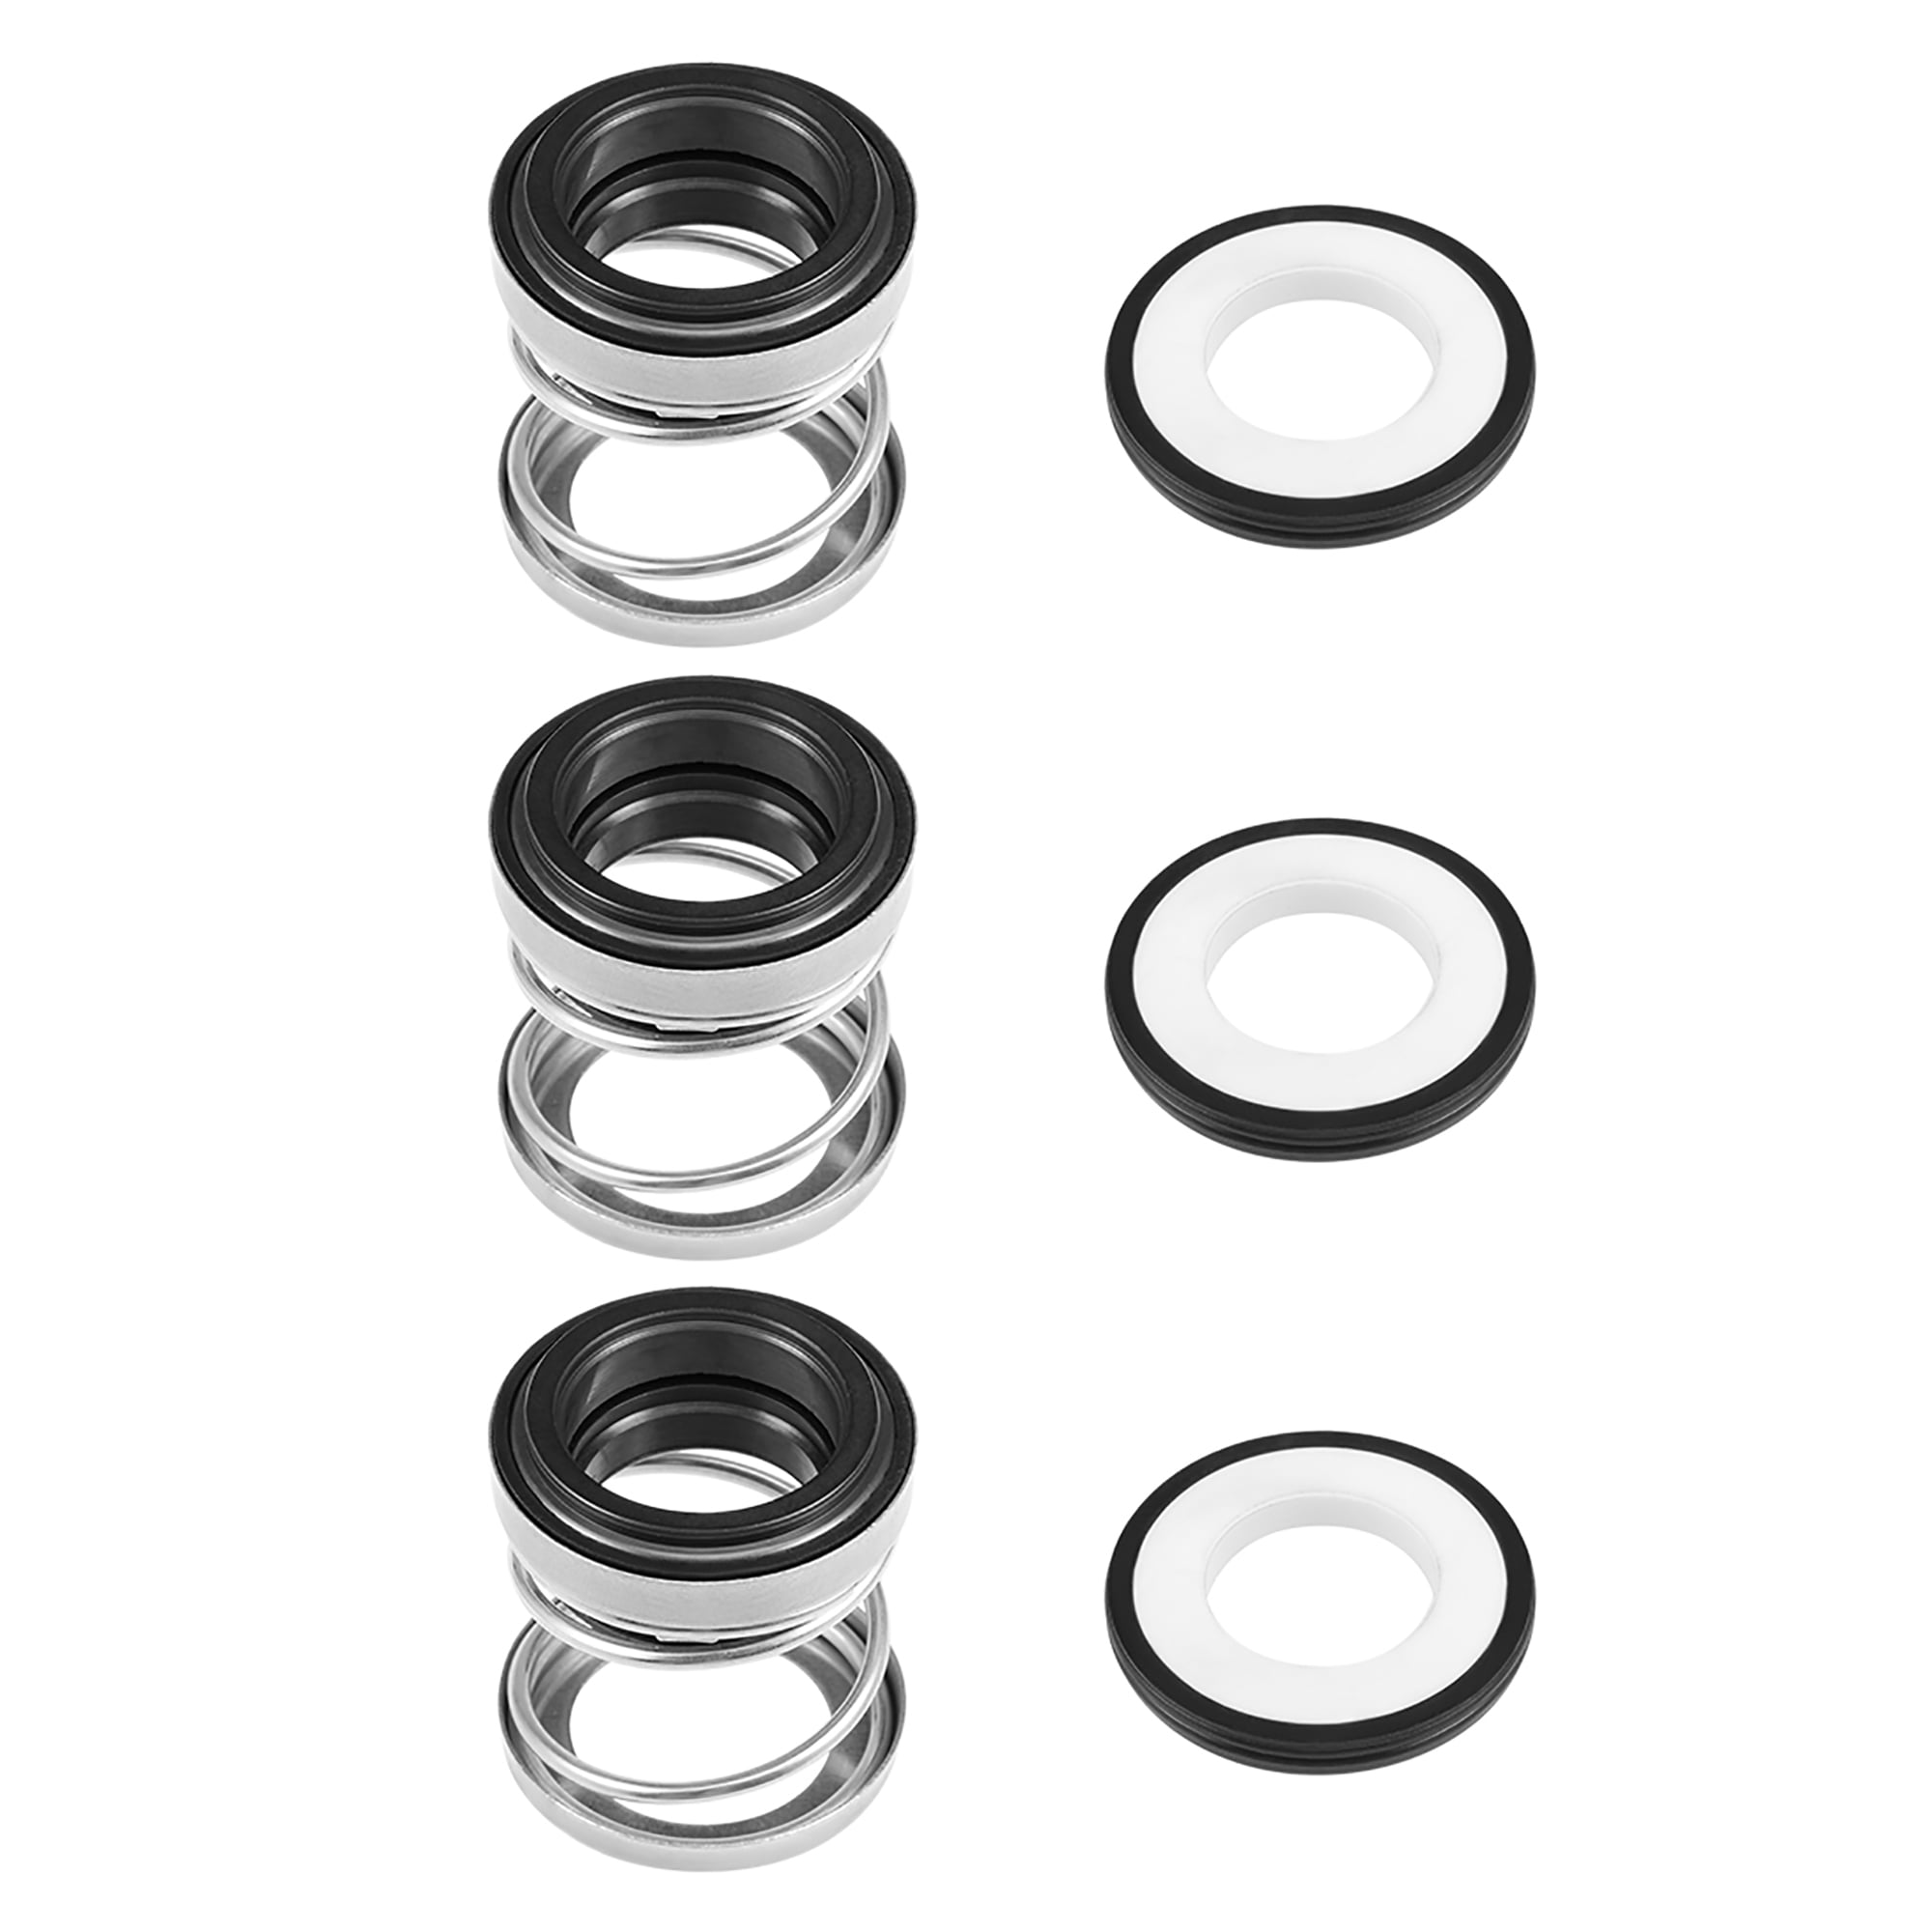 Mechanical Shaft Seal Replacement for Pool Spa Pump 3pcs 103-12 